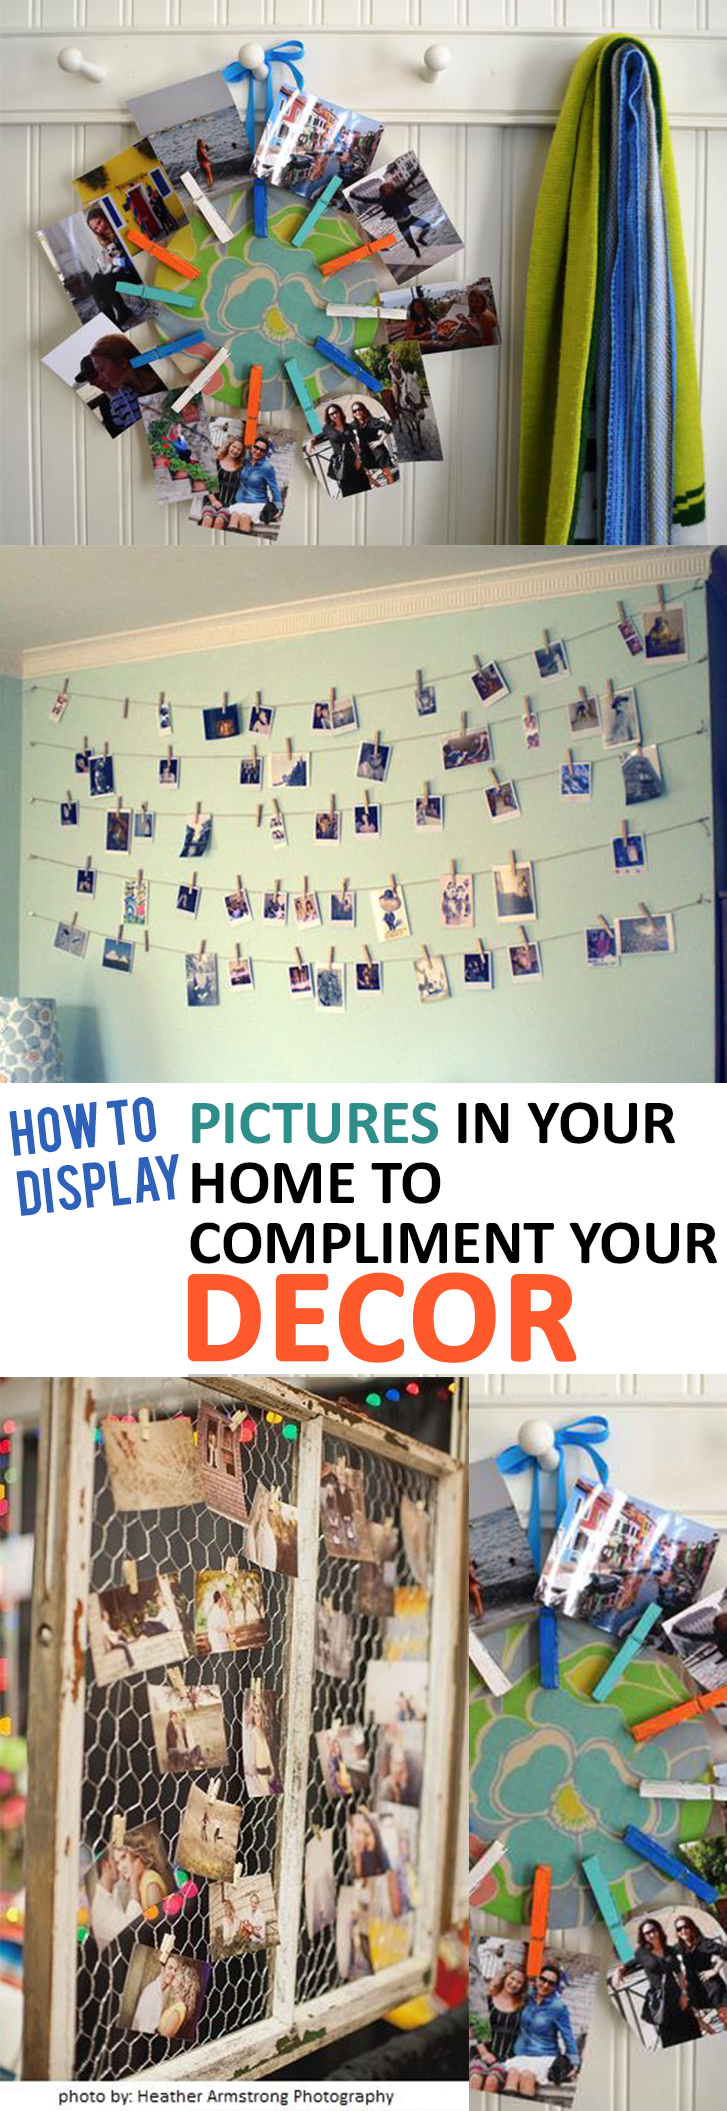 How to Display Pictures in Your Home to Compliment Your Decor